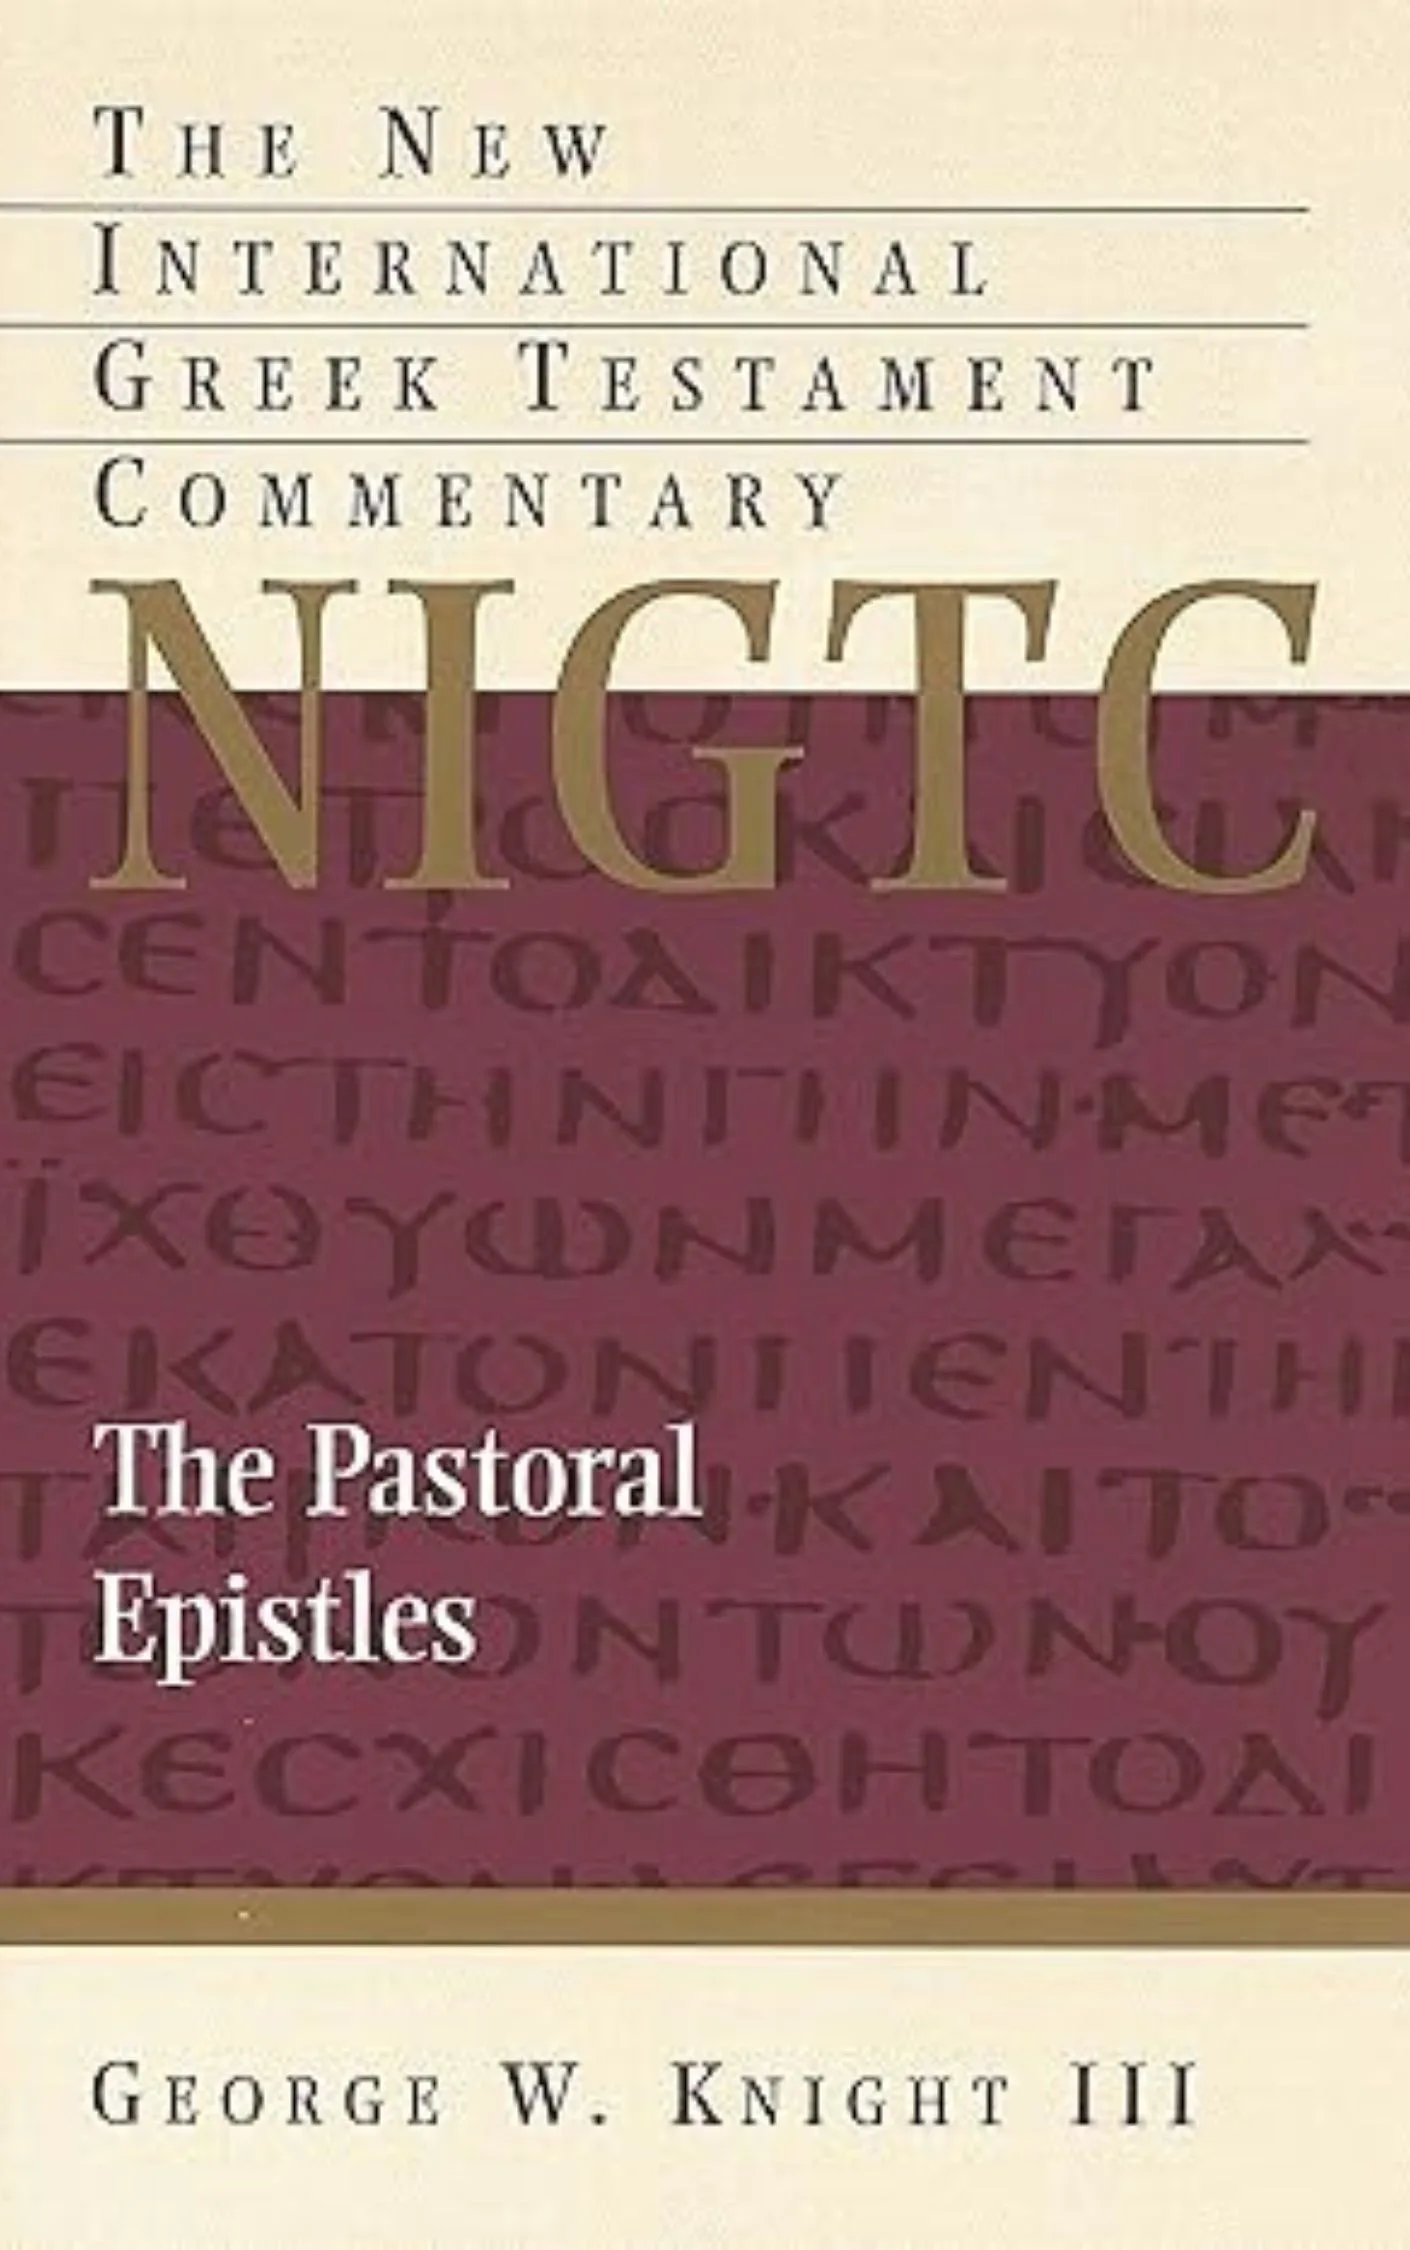 The Pastoral Epistles by George W. Knight